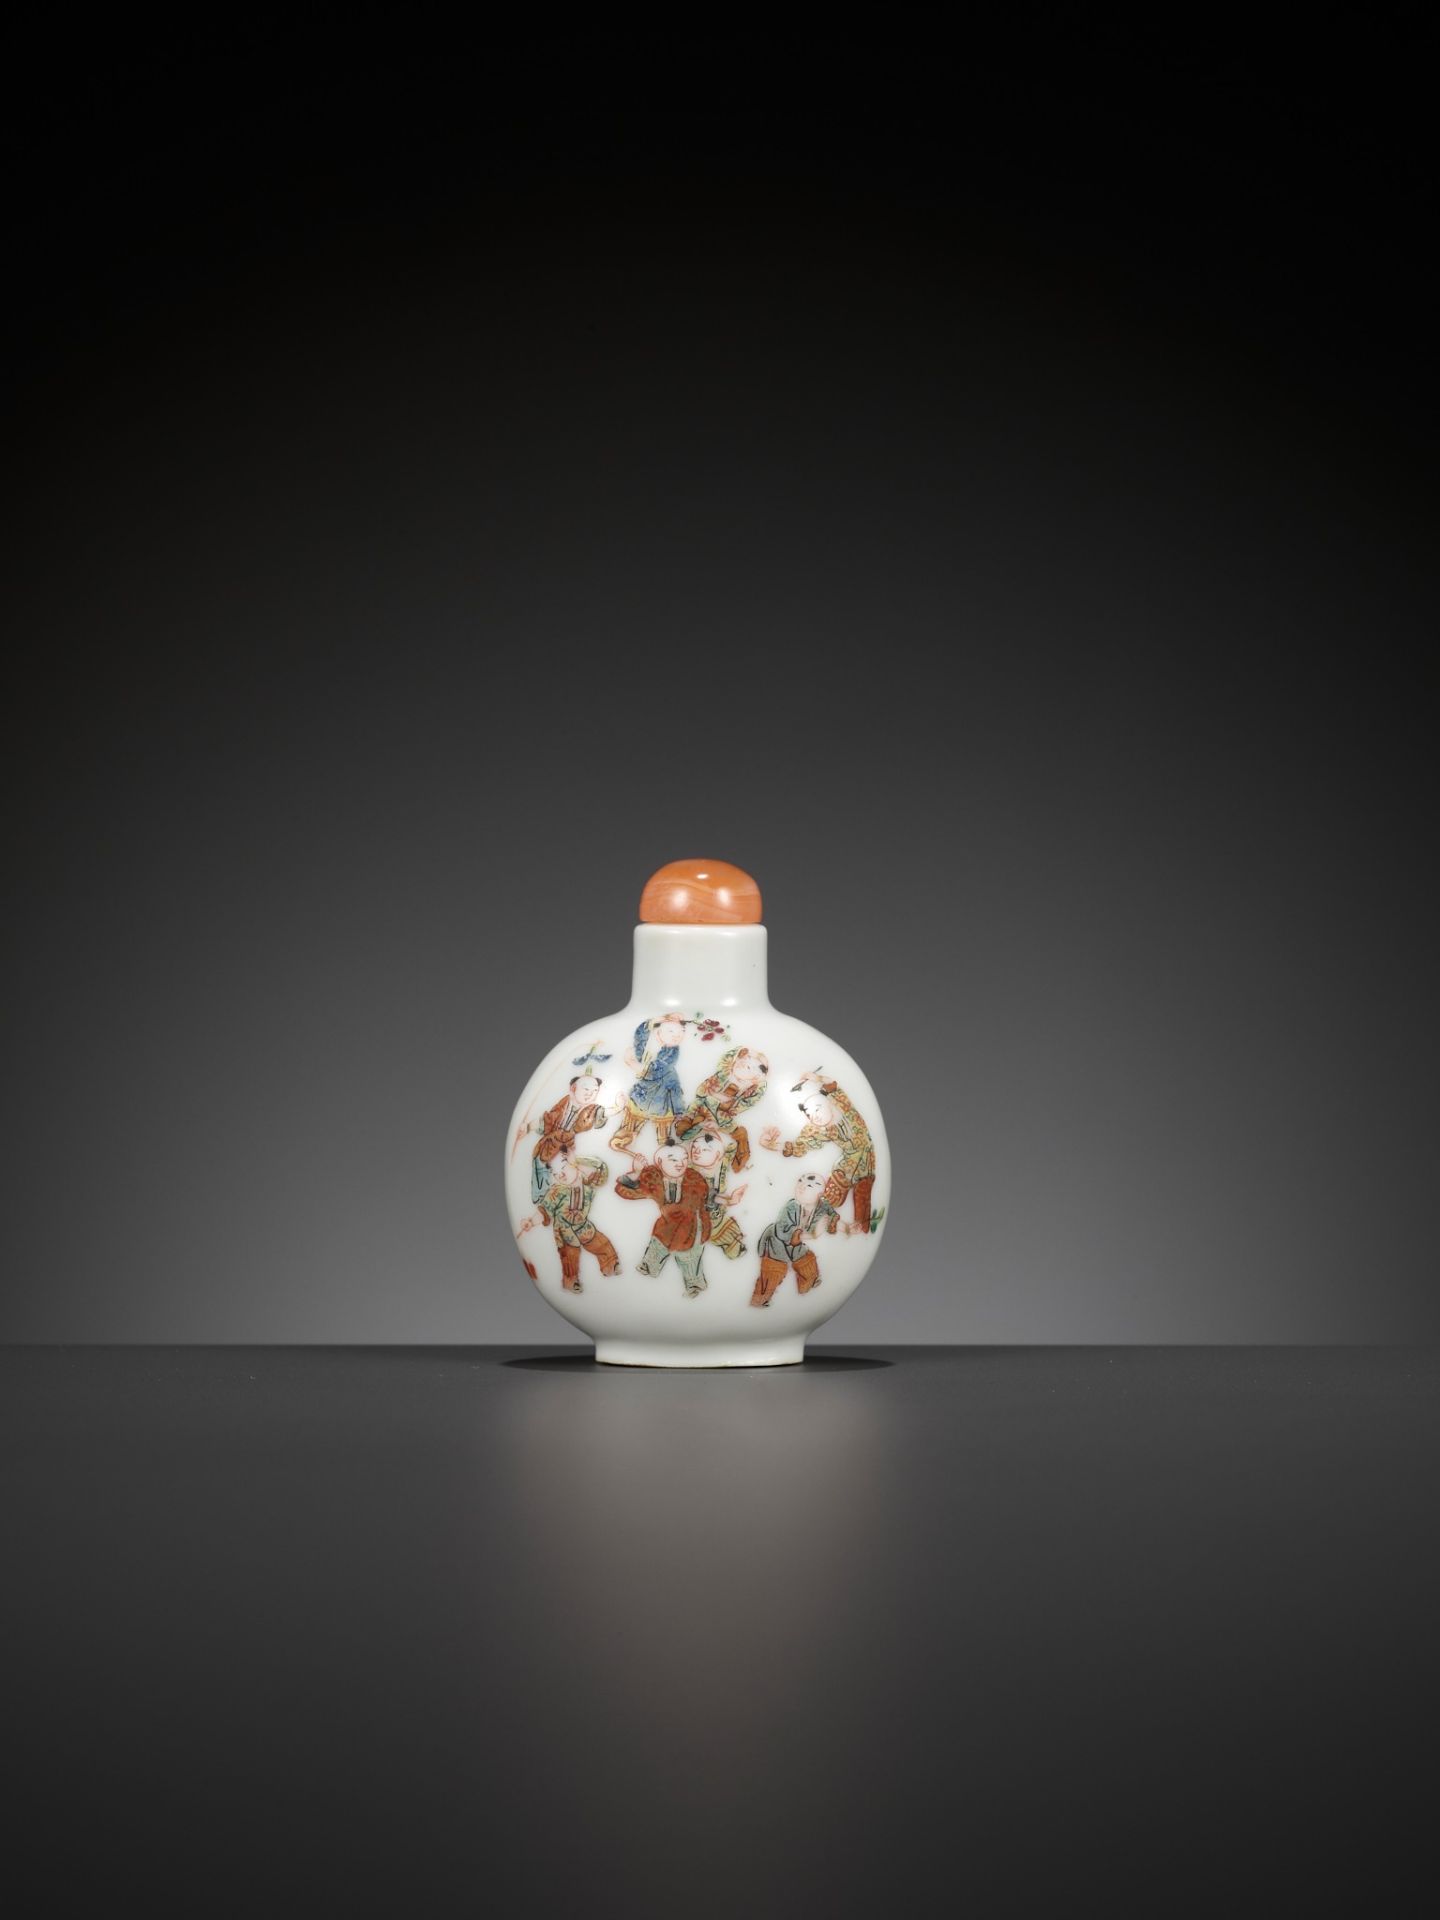 AN IMPERIAL FAMILLE ROSE 'BOYS AT PLAY' PORCELAIN SNUFF BOTTLE, DAOGUANG MARK AND PERIOD - Image 7 of 11